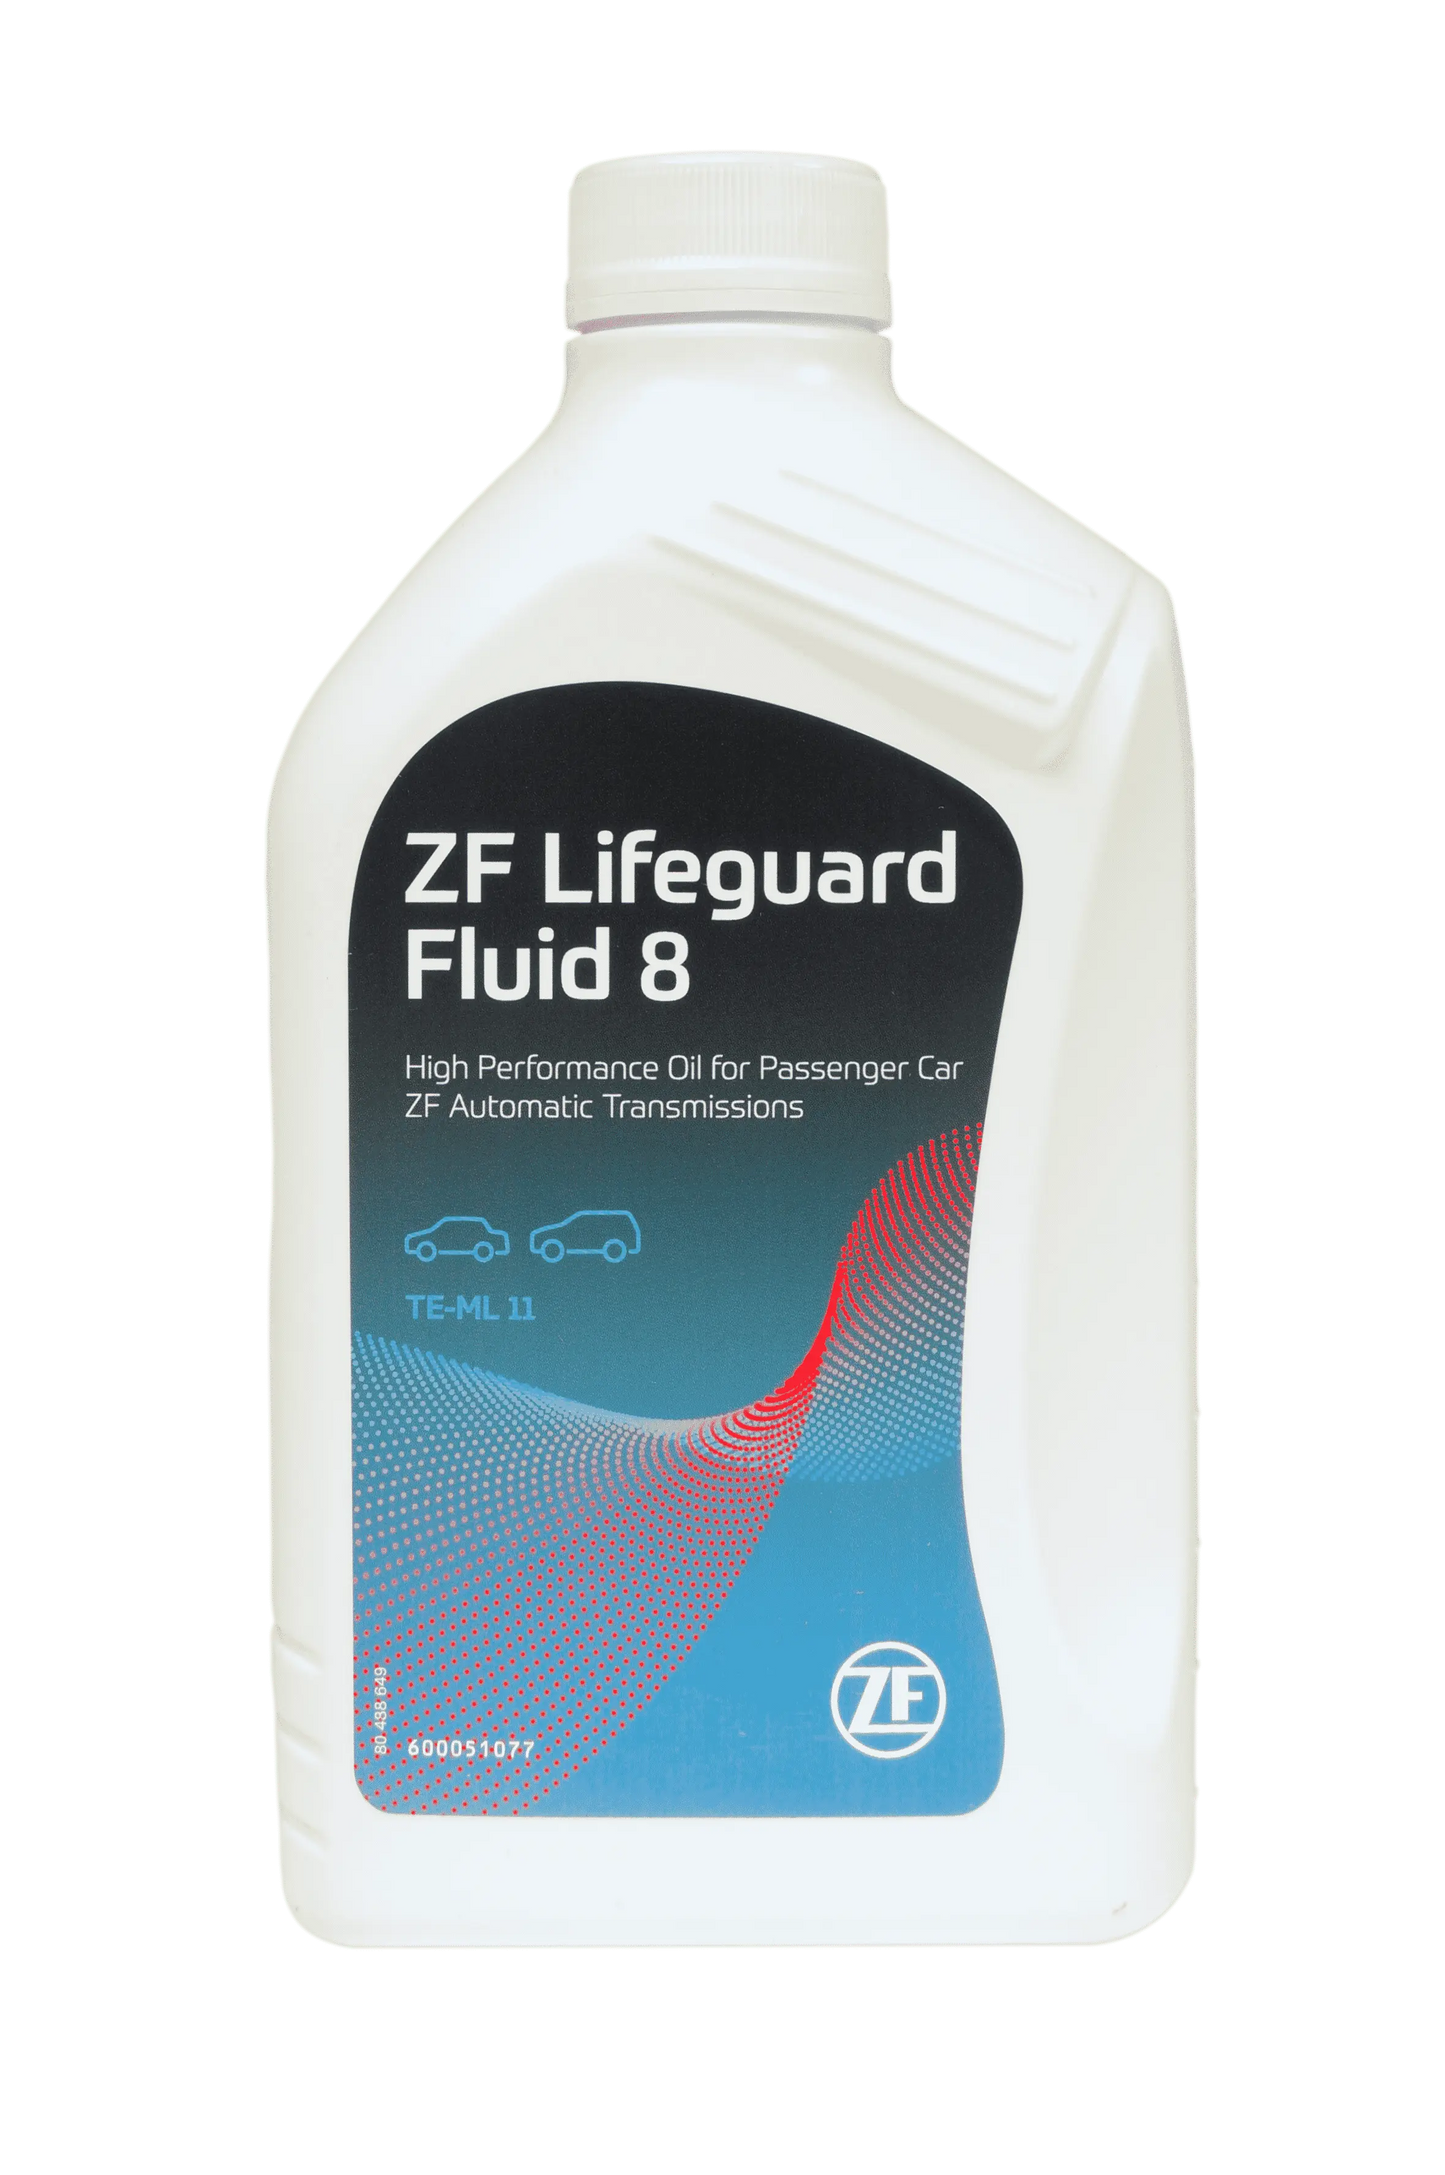 Buy now from Sussex Autos ZF Lifeguard Fluid 8 (1 L)